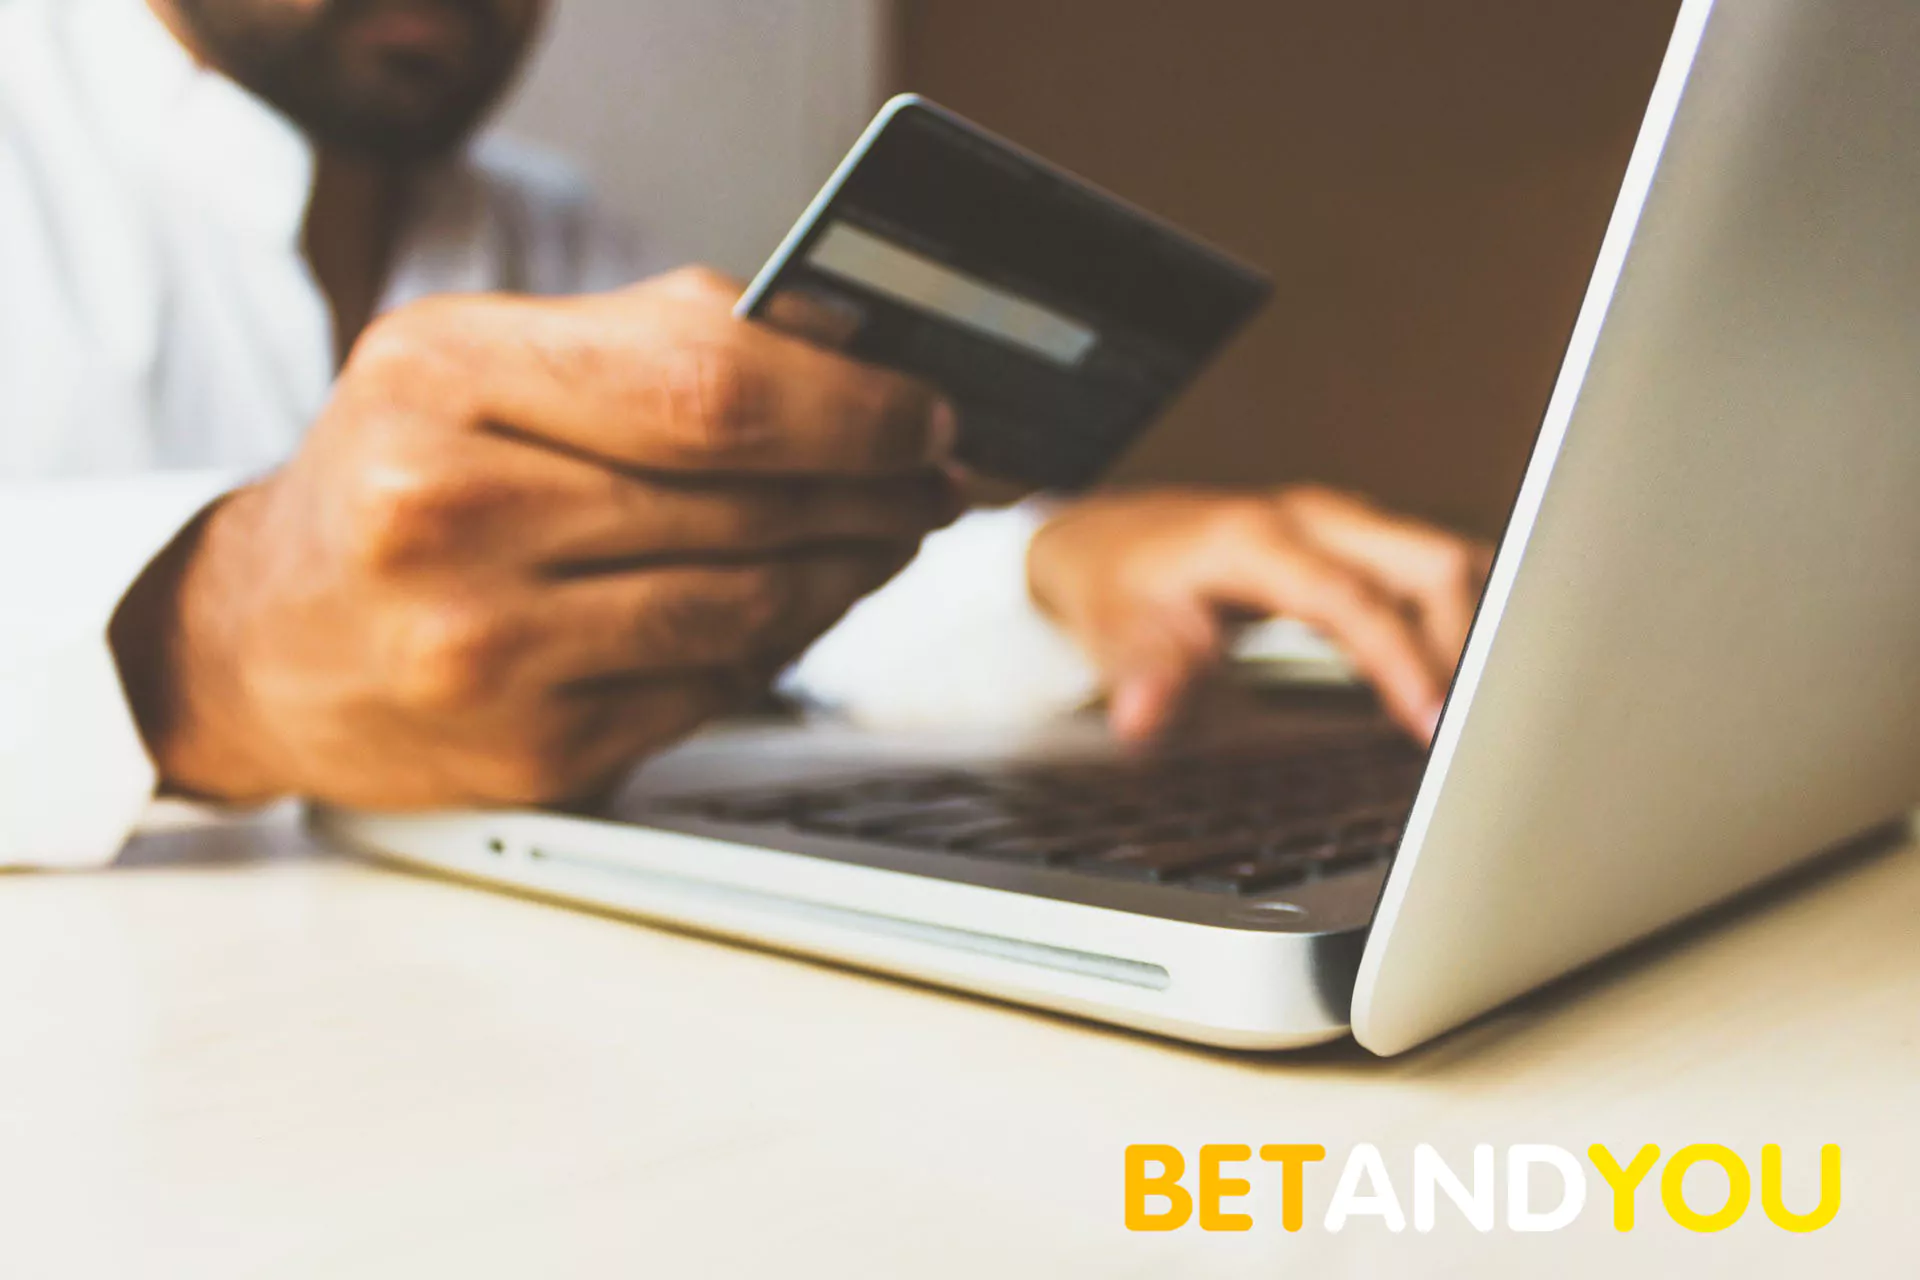 There are a few simple steps to start betting at BetAndYou.